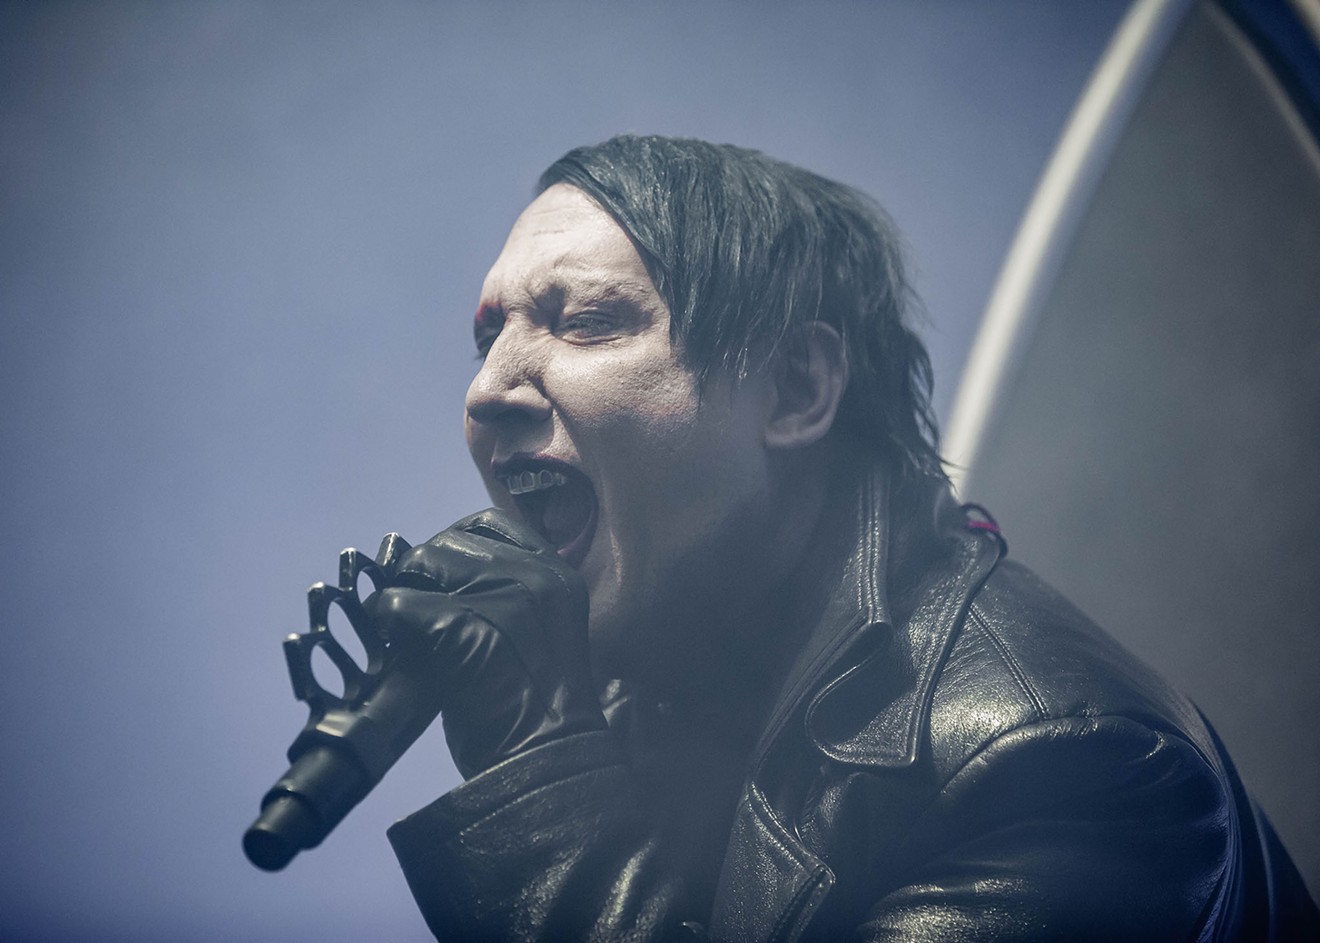 Marilyn Manson performed at the Fillmore Auditorium on January 20, 2018.